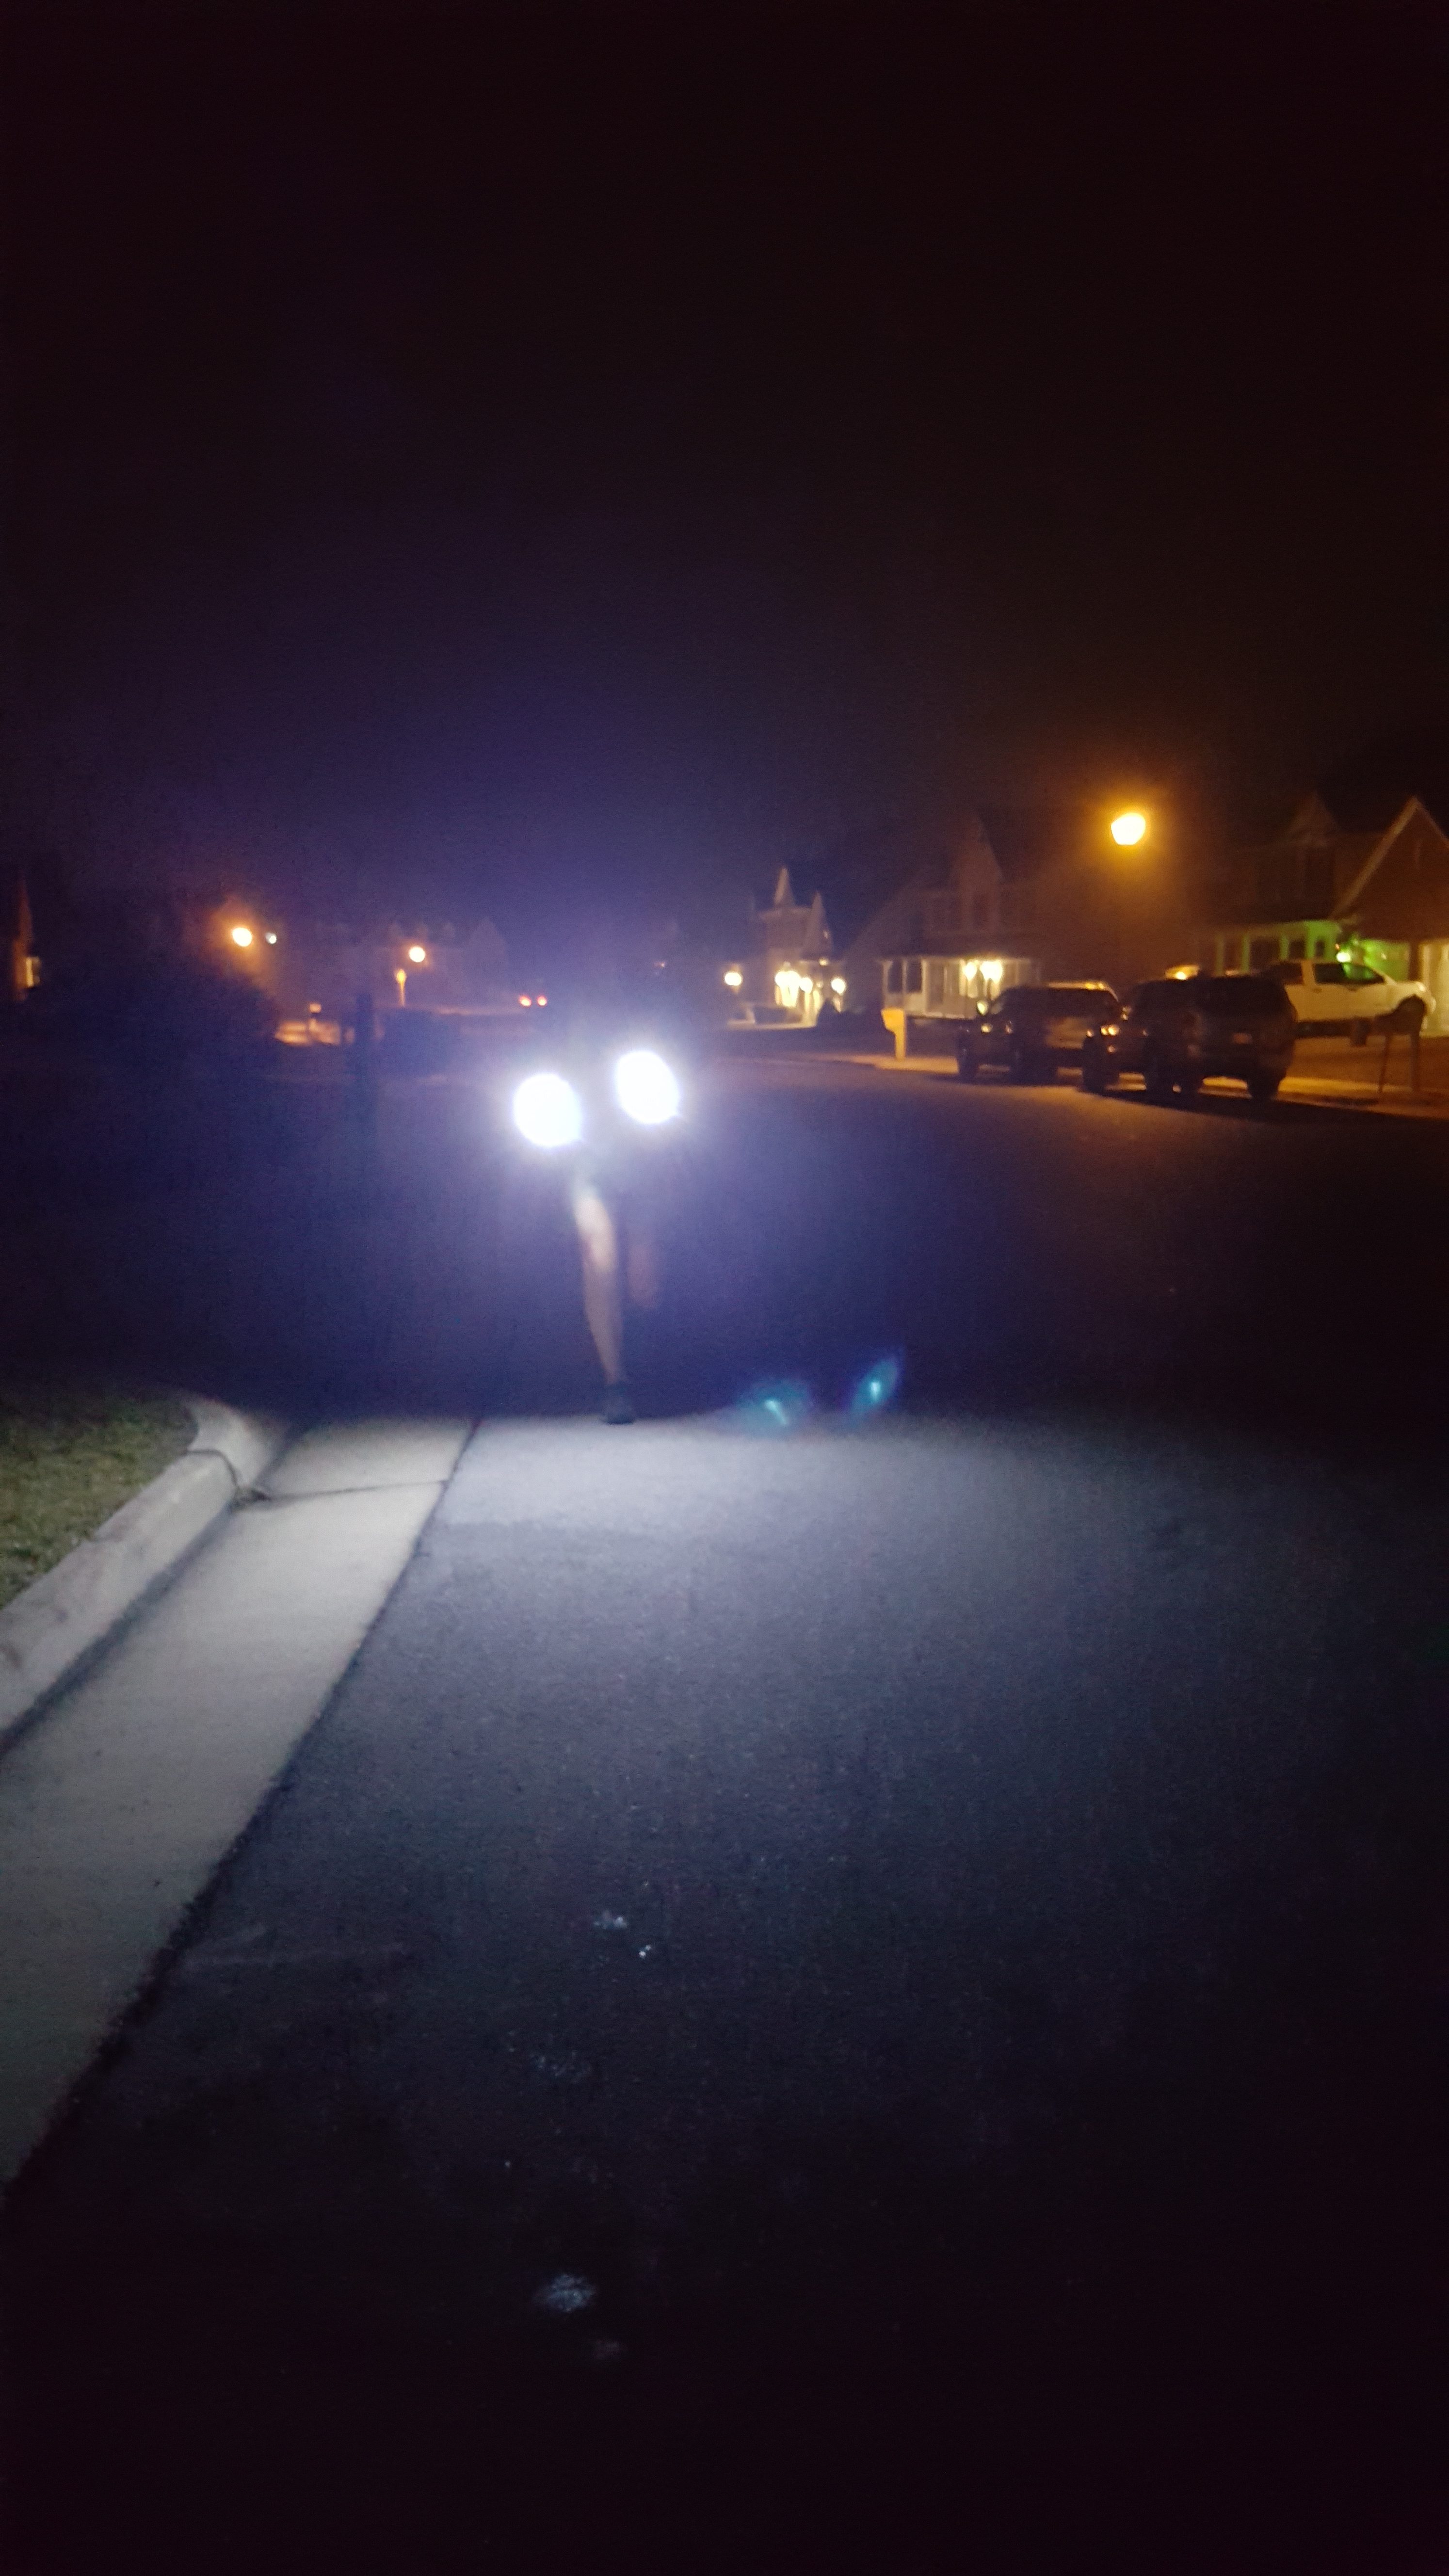 Knuckle Lights Product Review. An alternative to the headlamp